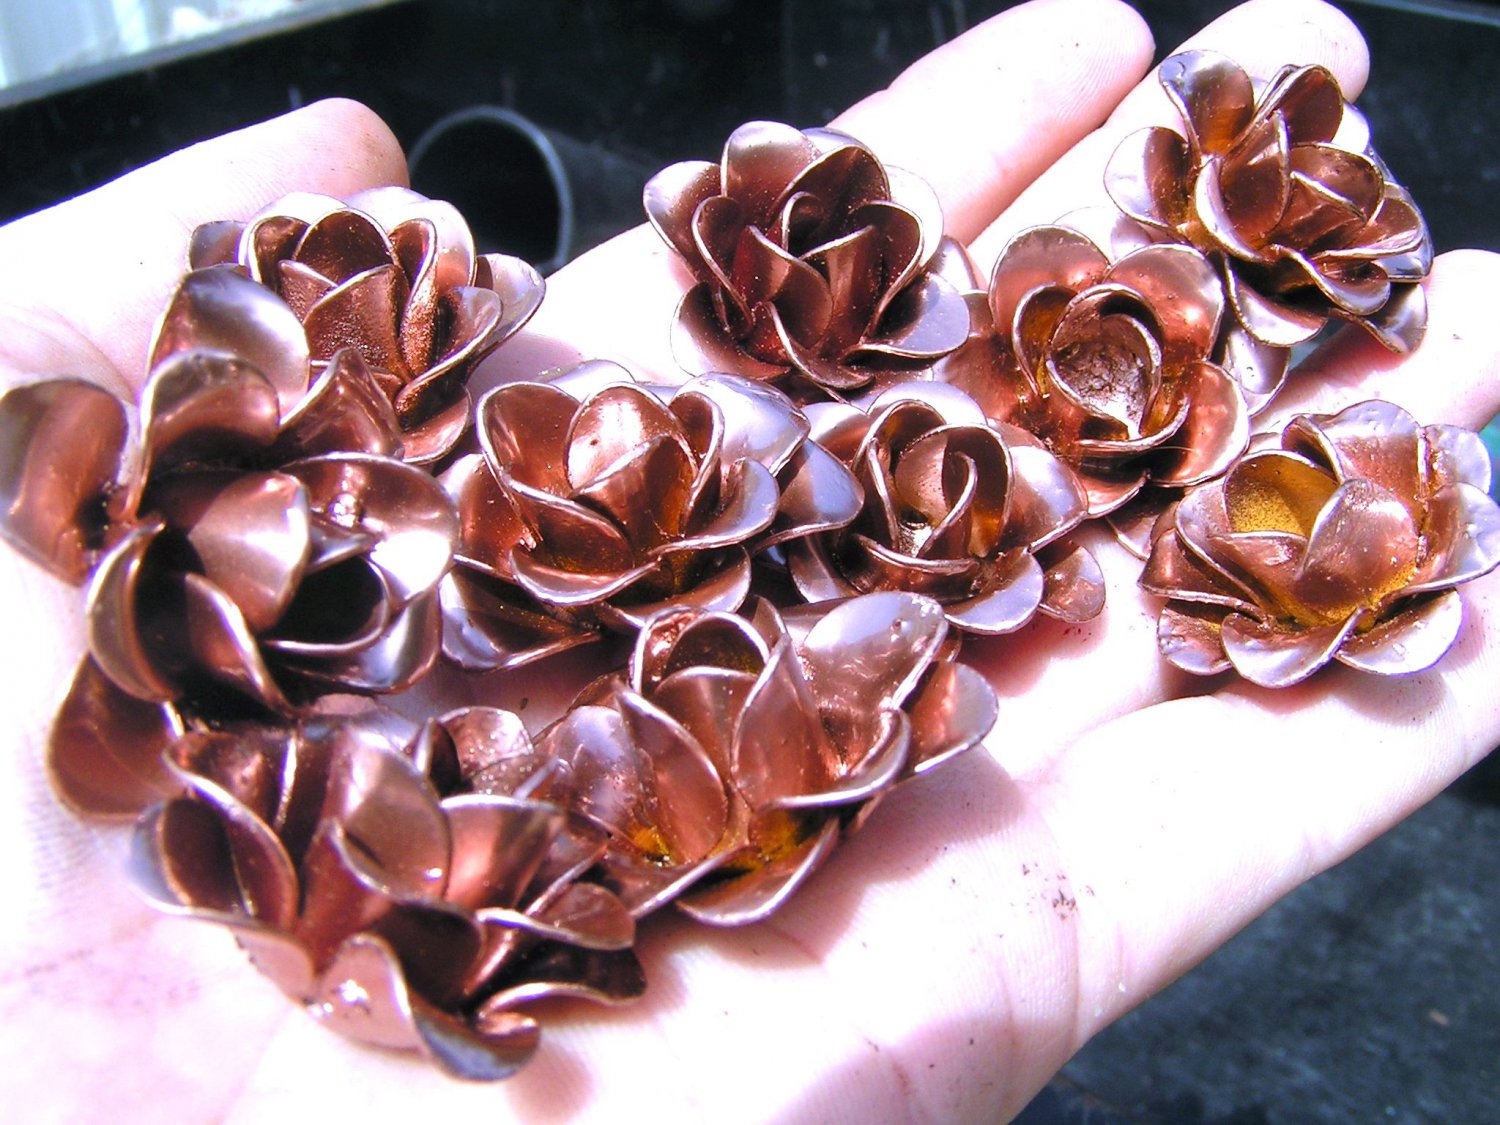 10 metal shiny copper colored roses flowers for accents, embellishments, crafting, arrangements